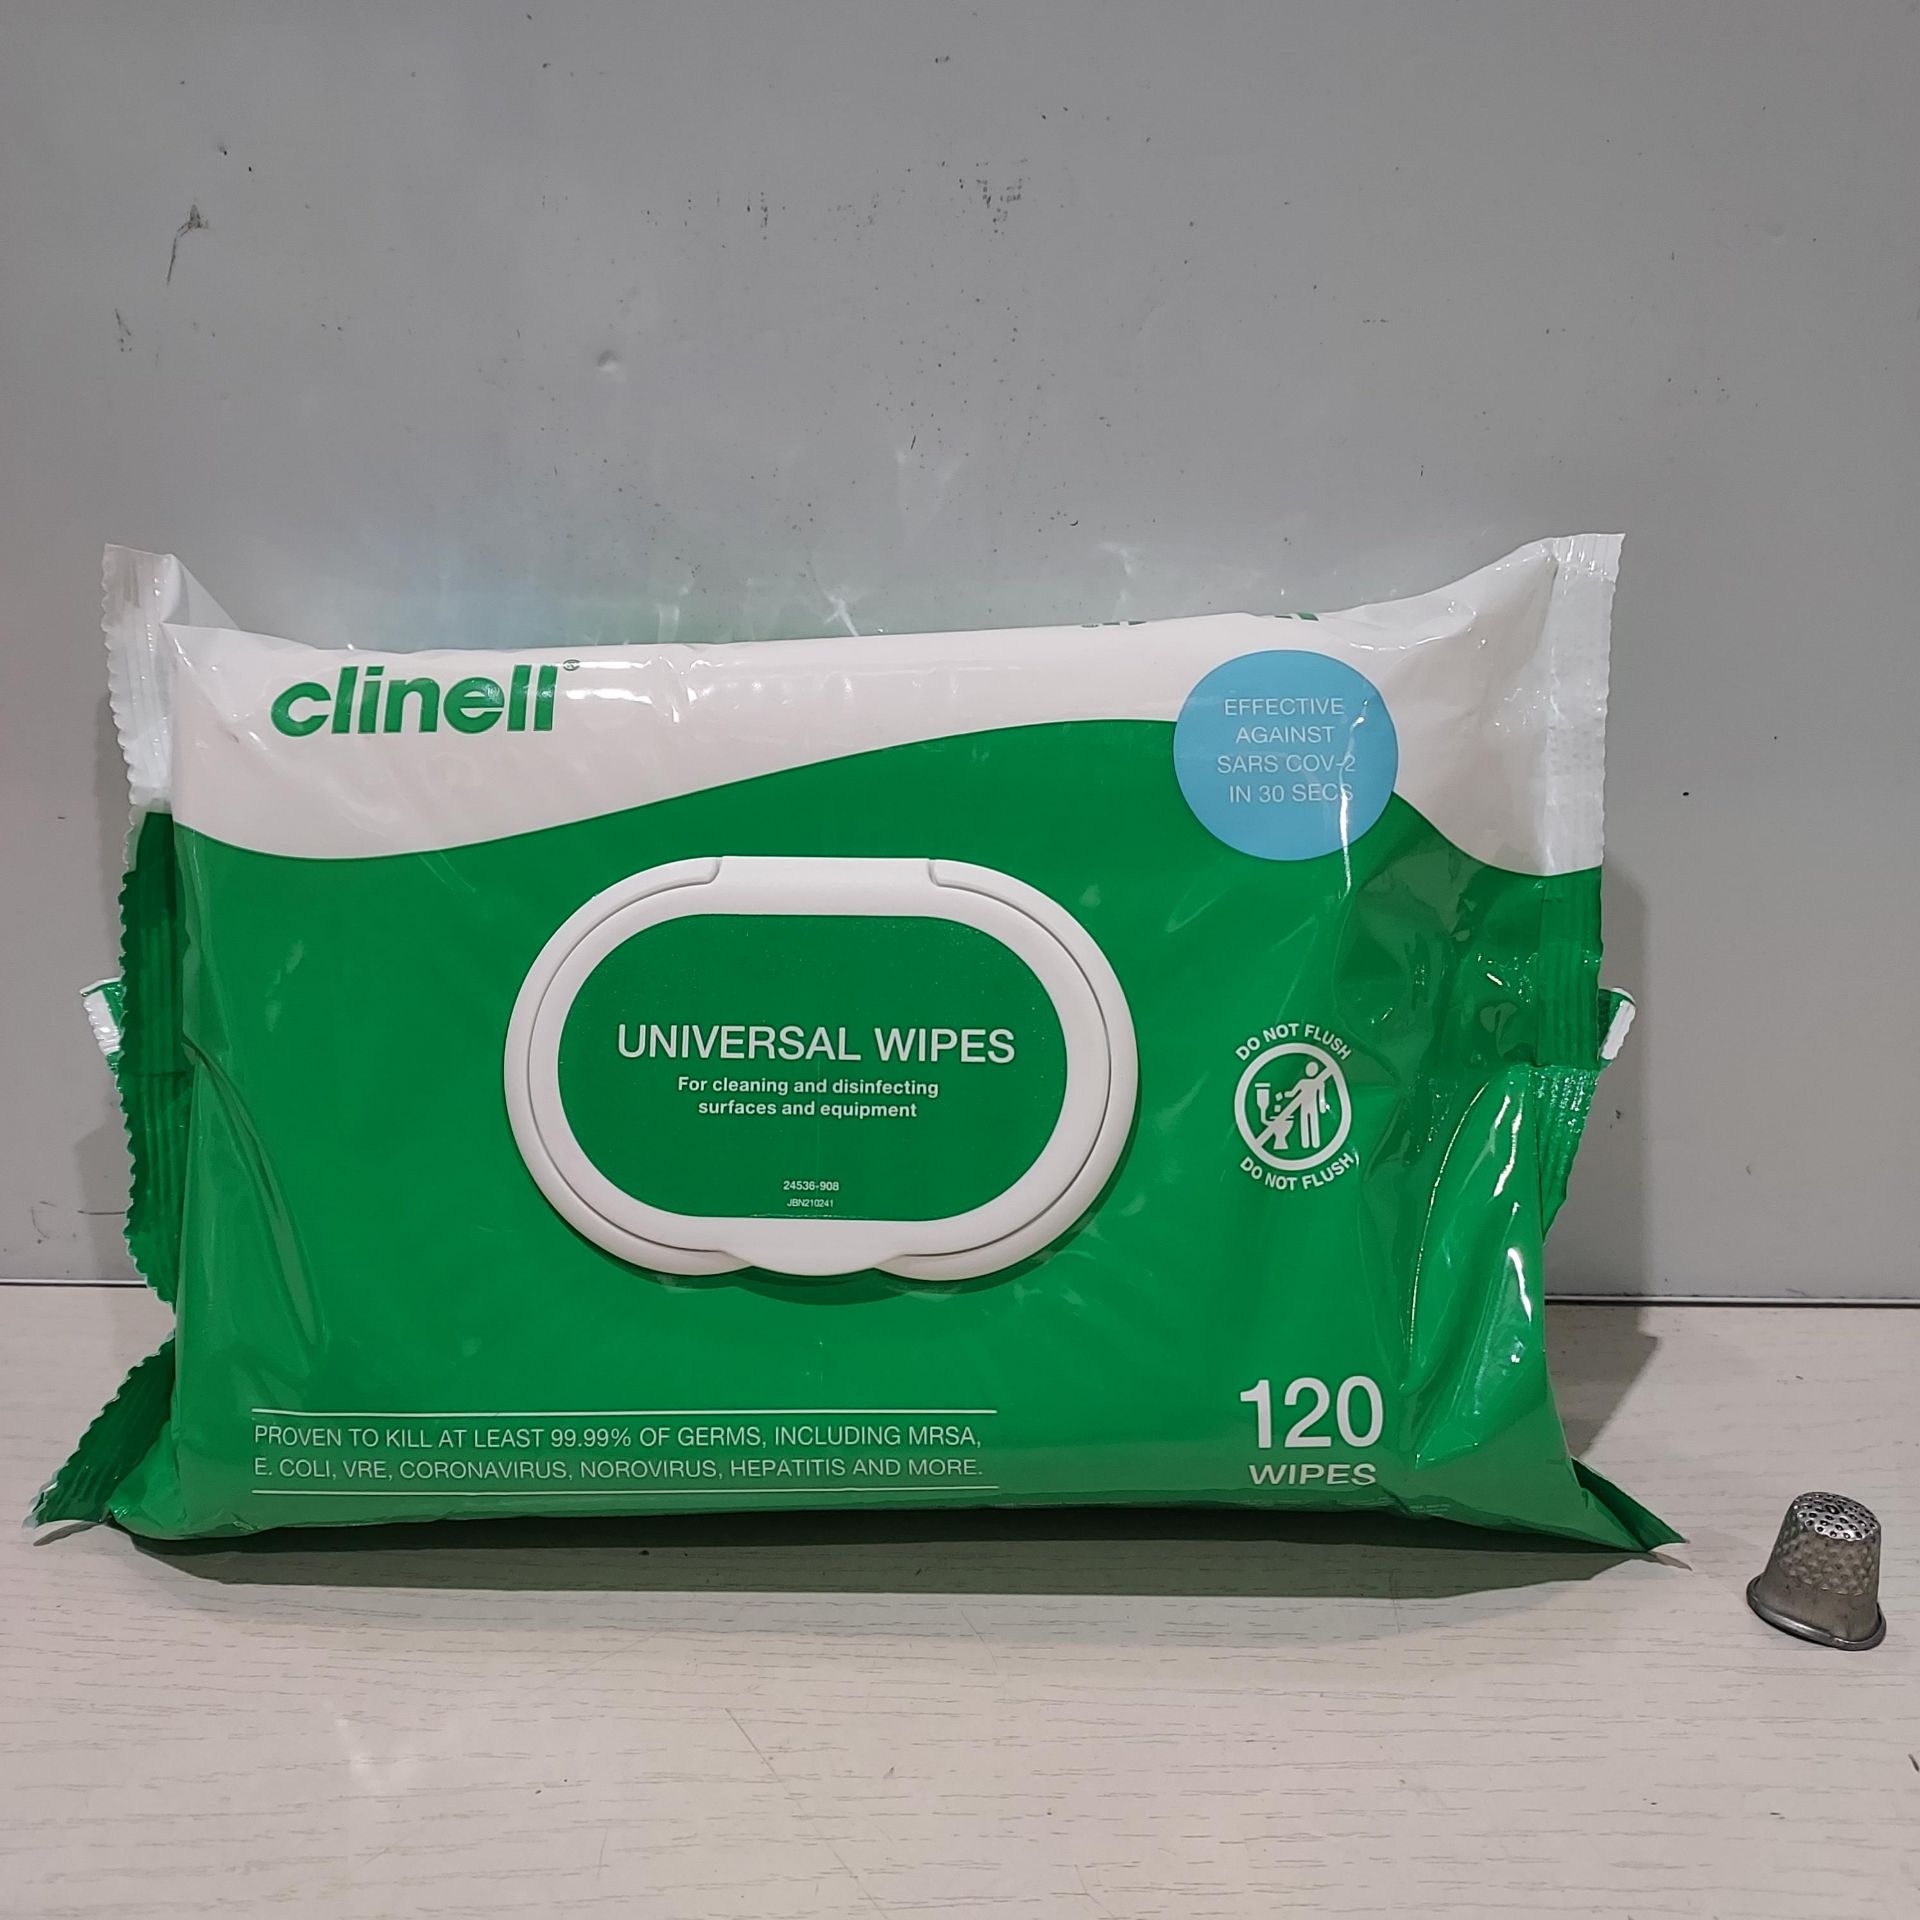 45 X BRAND NEW PACKS OF 120 CLINELL WIPES IN 9 BOXES